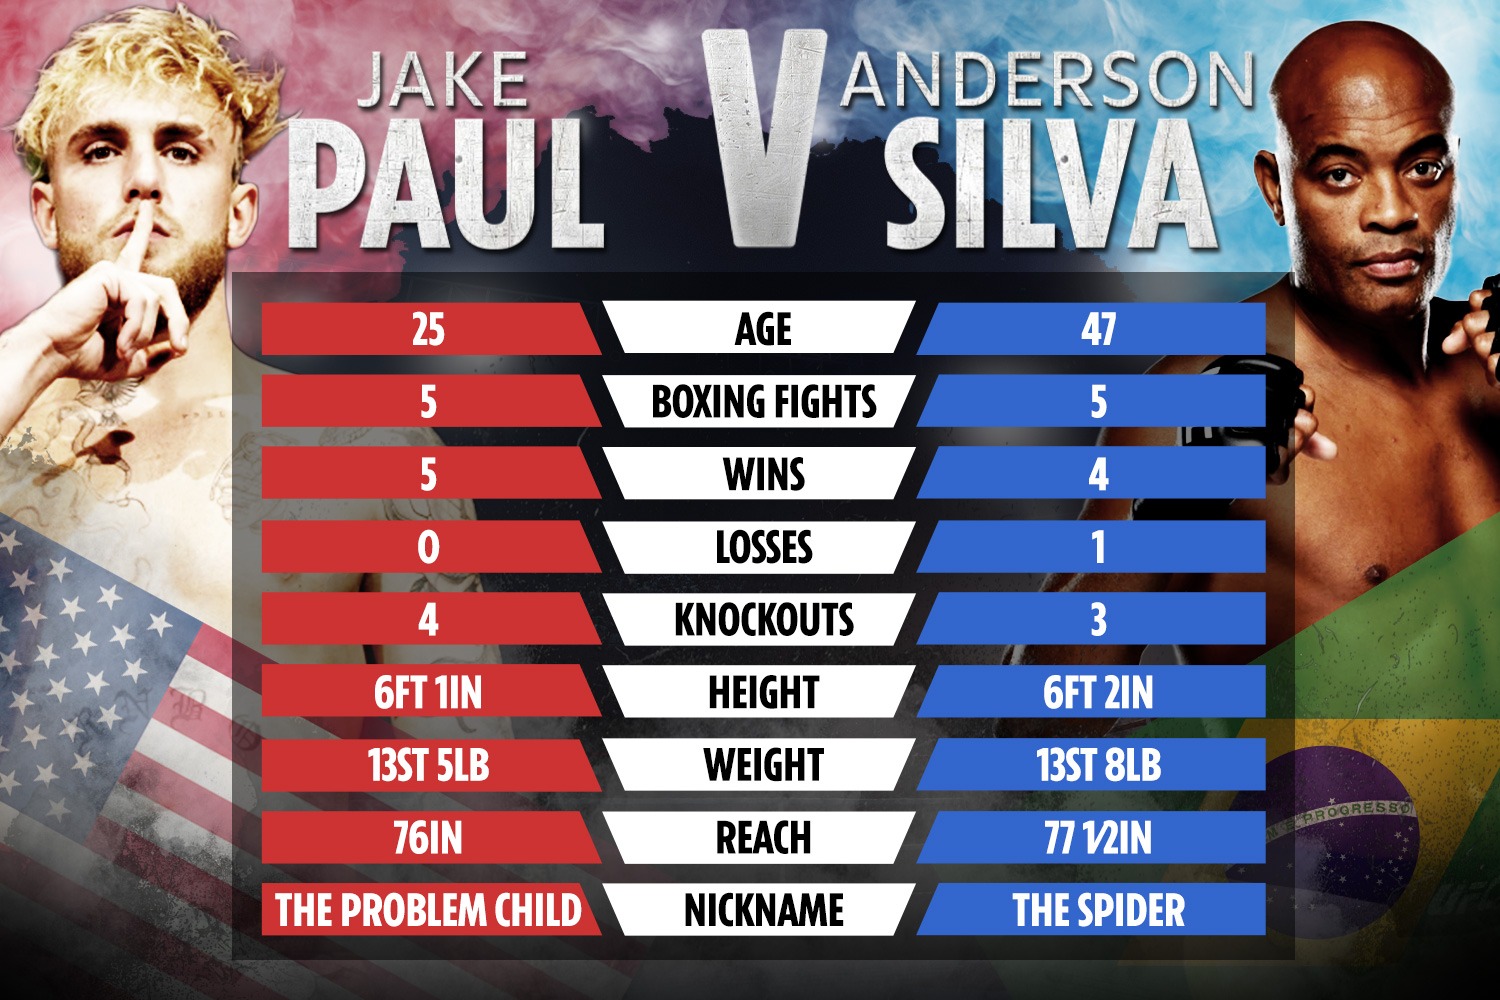 , Jake Paul net worth 2022 – how much money has he made from boxing career and what’s the payday for Anderson Silva fight?